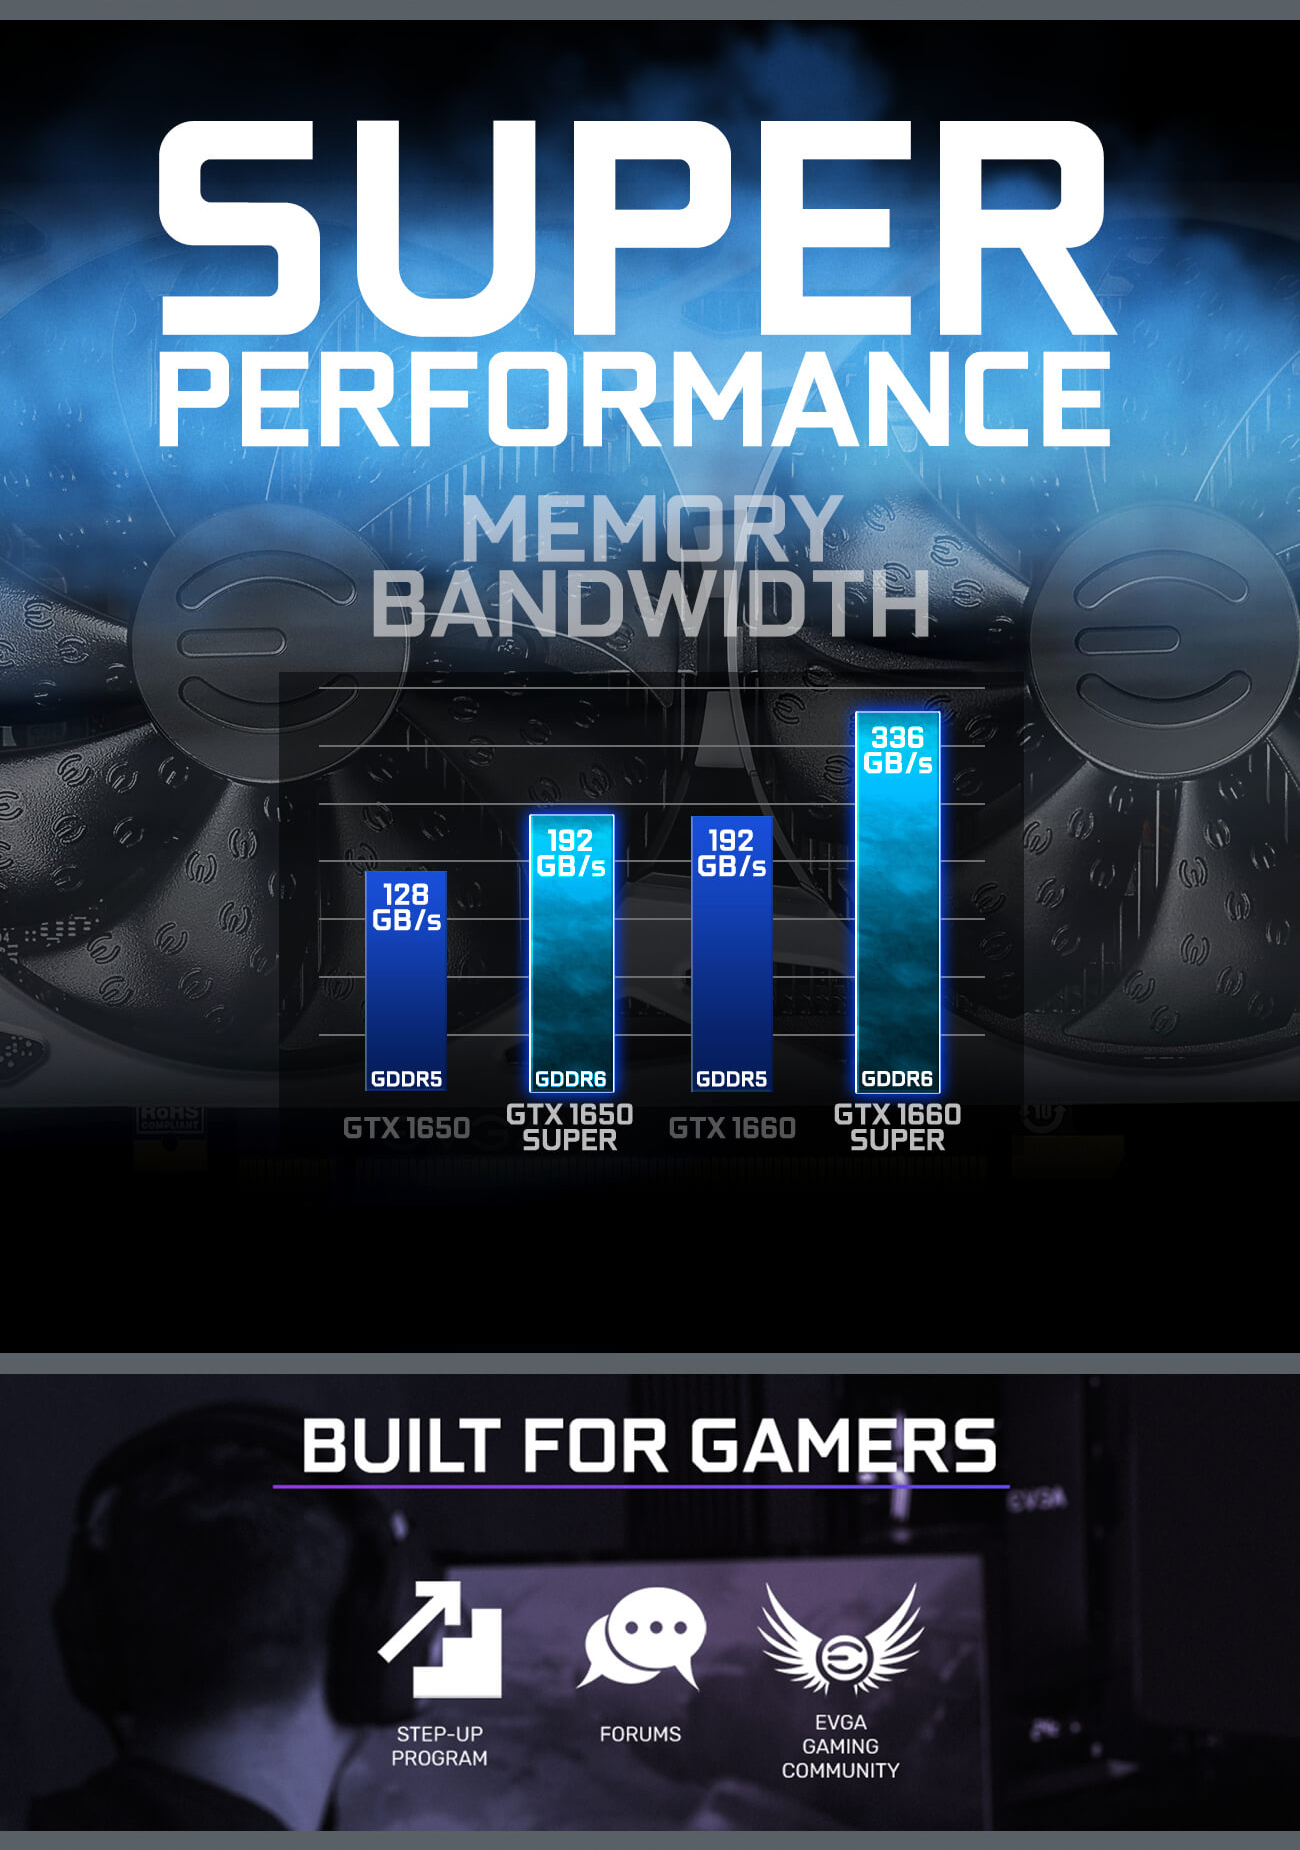 EVGA GeForce GTX 1650 SUPER gaming cards memory and performance are improved graph and Built for Gamers